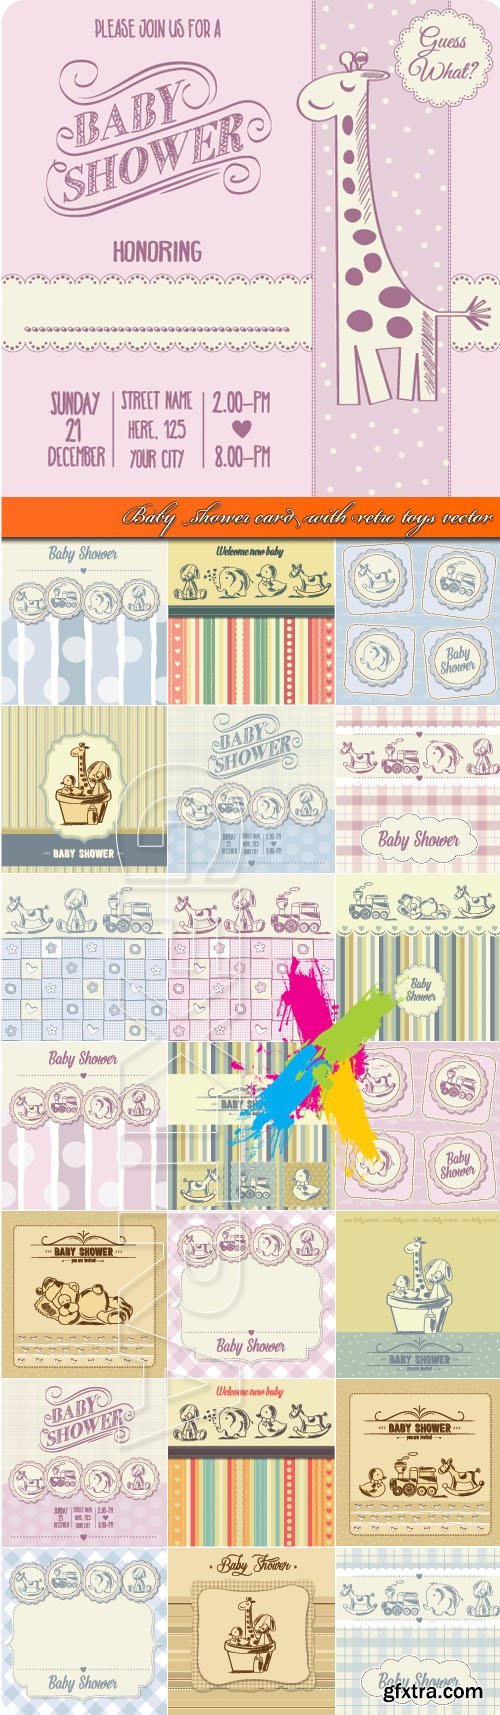 Baby shower card with retro toys vector